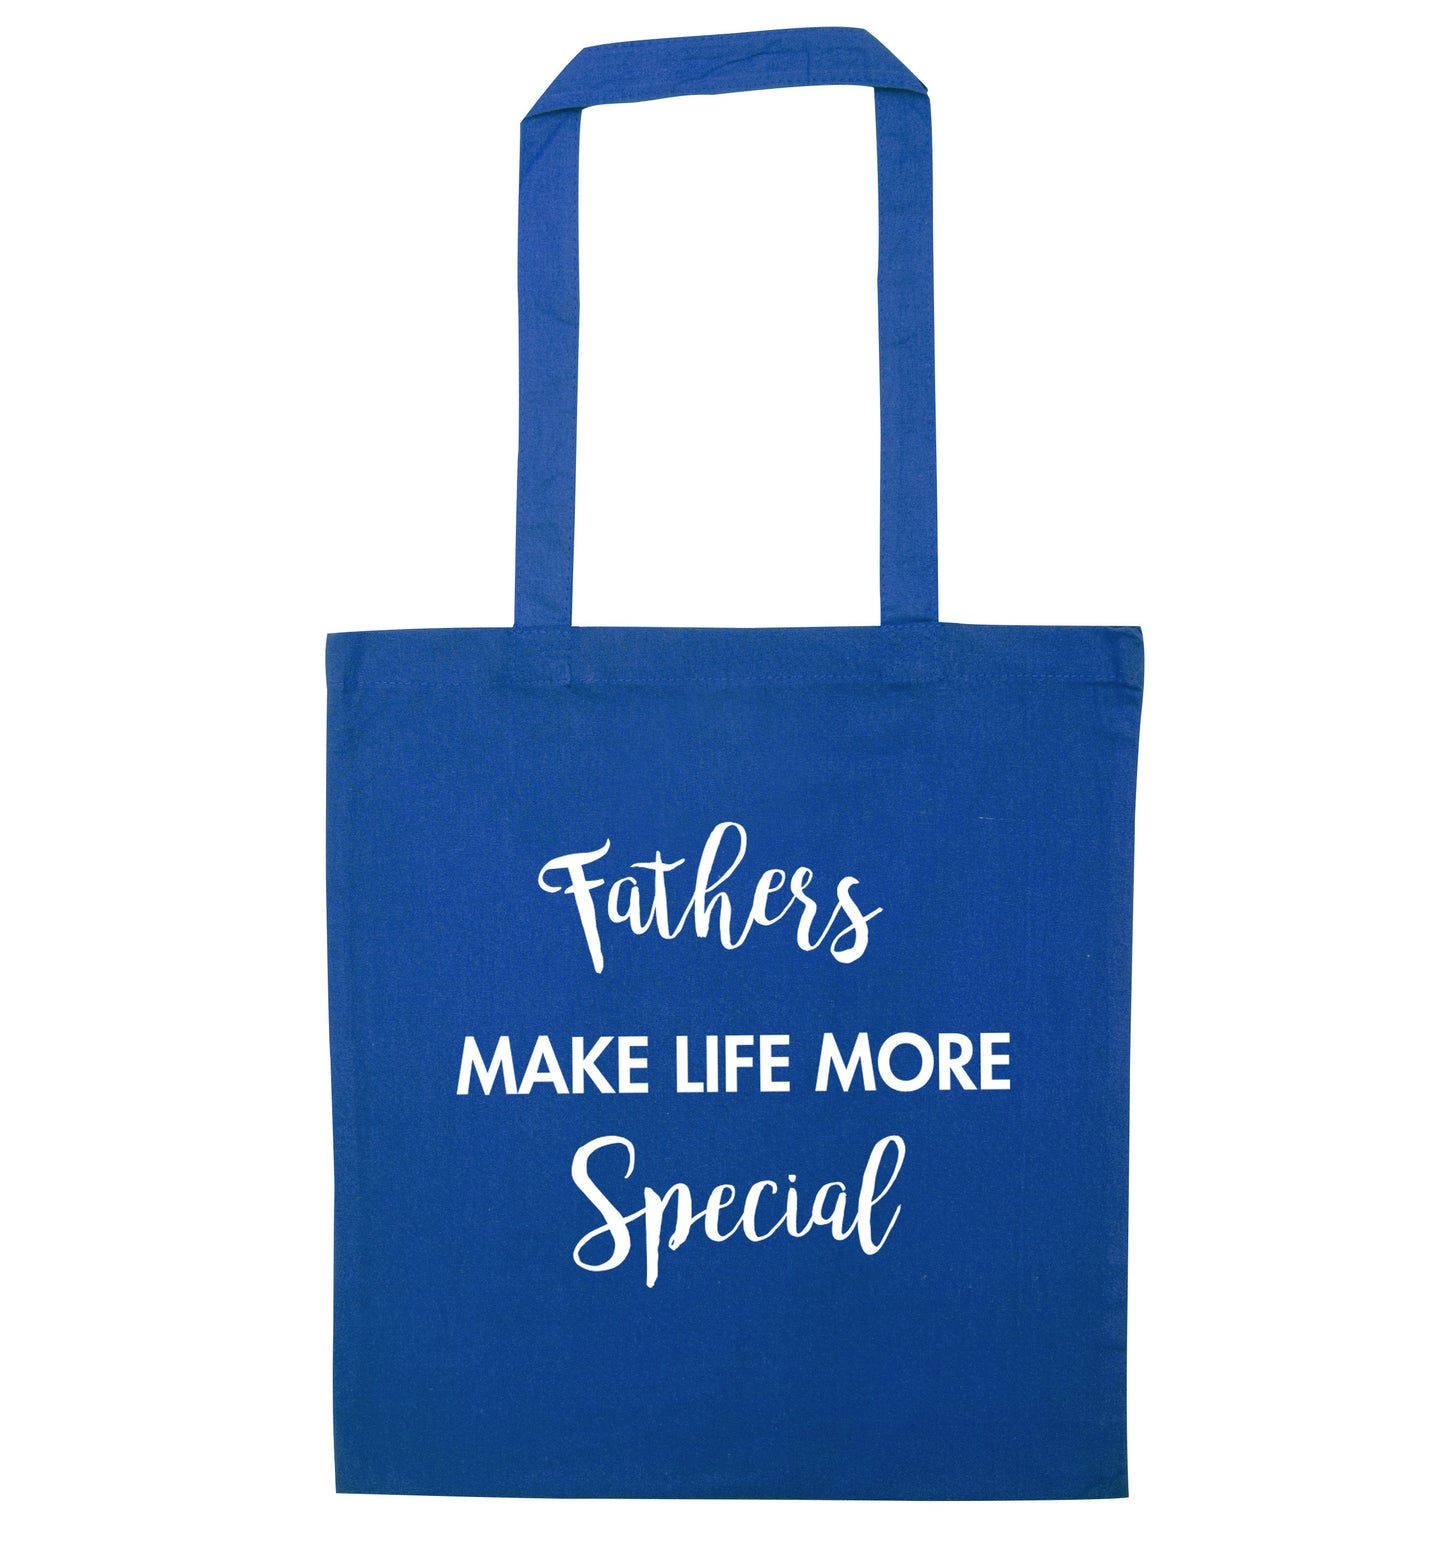 Fathers make life more special blue tote bag